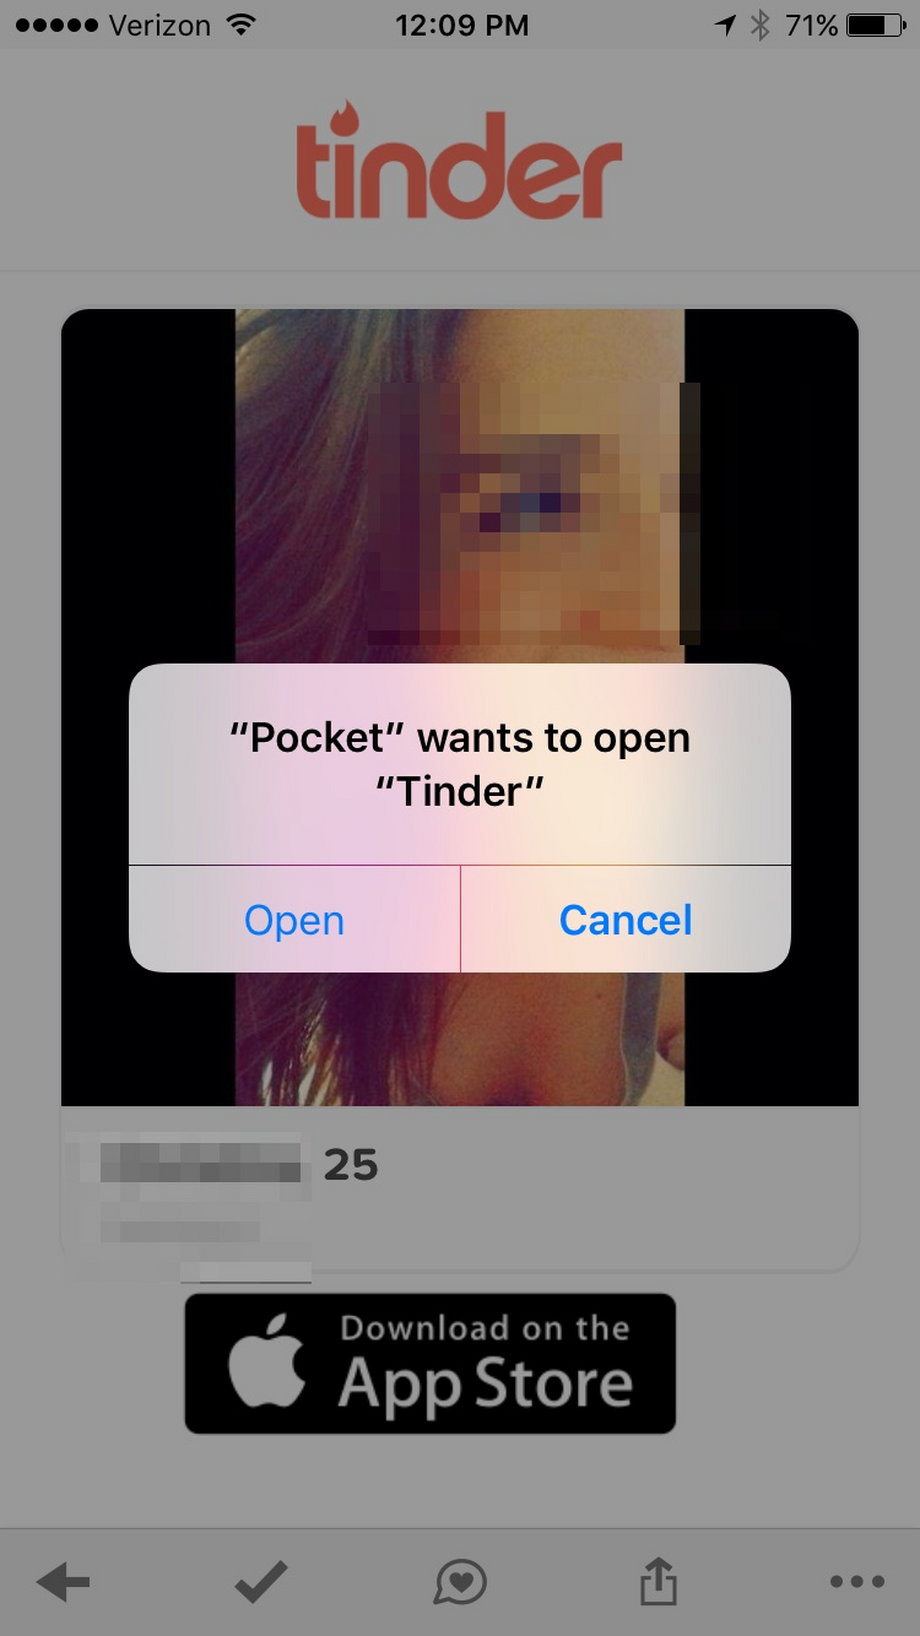 And the integration actually works! When I click from Pocket, I get pushed into the Tinder app and can swipe.